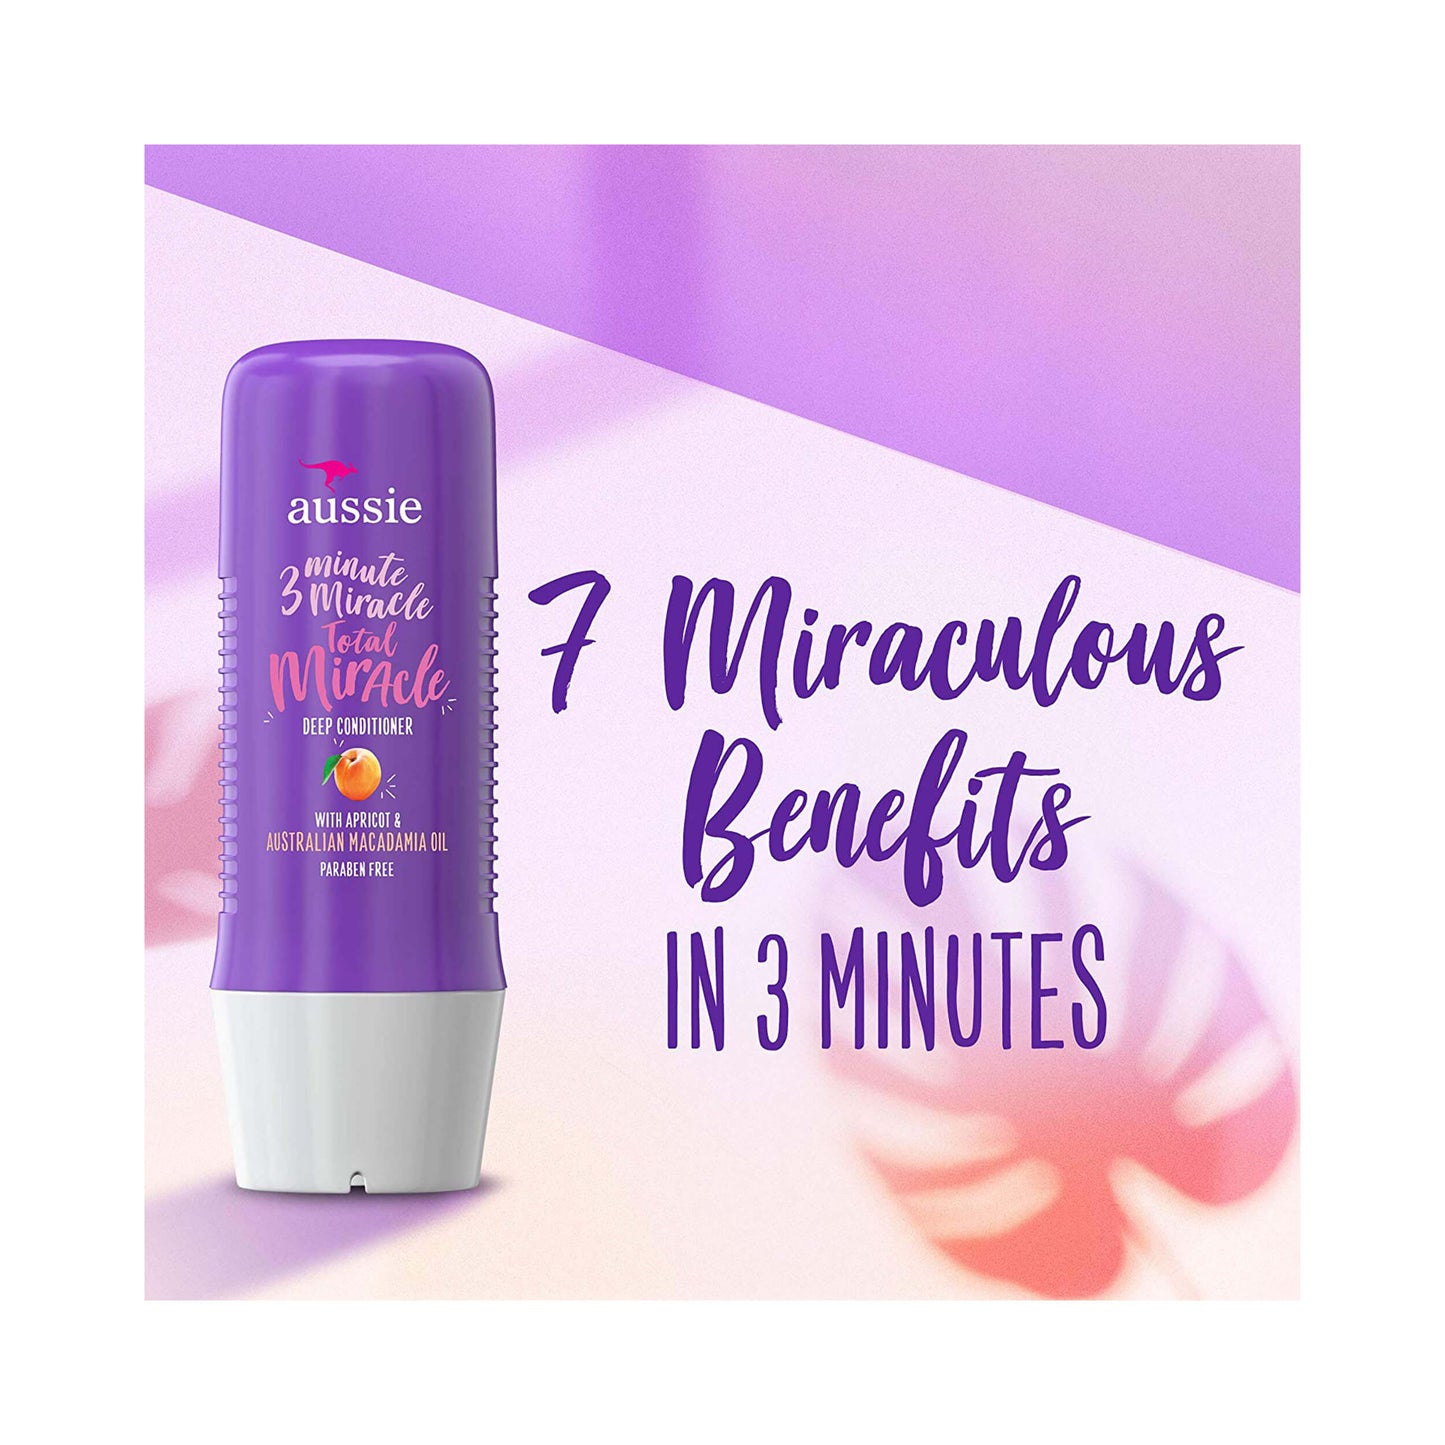 Aussie 3 Minute Miracle Total Miracle Deep Conditioner